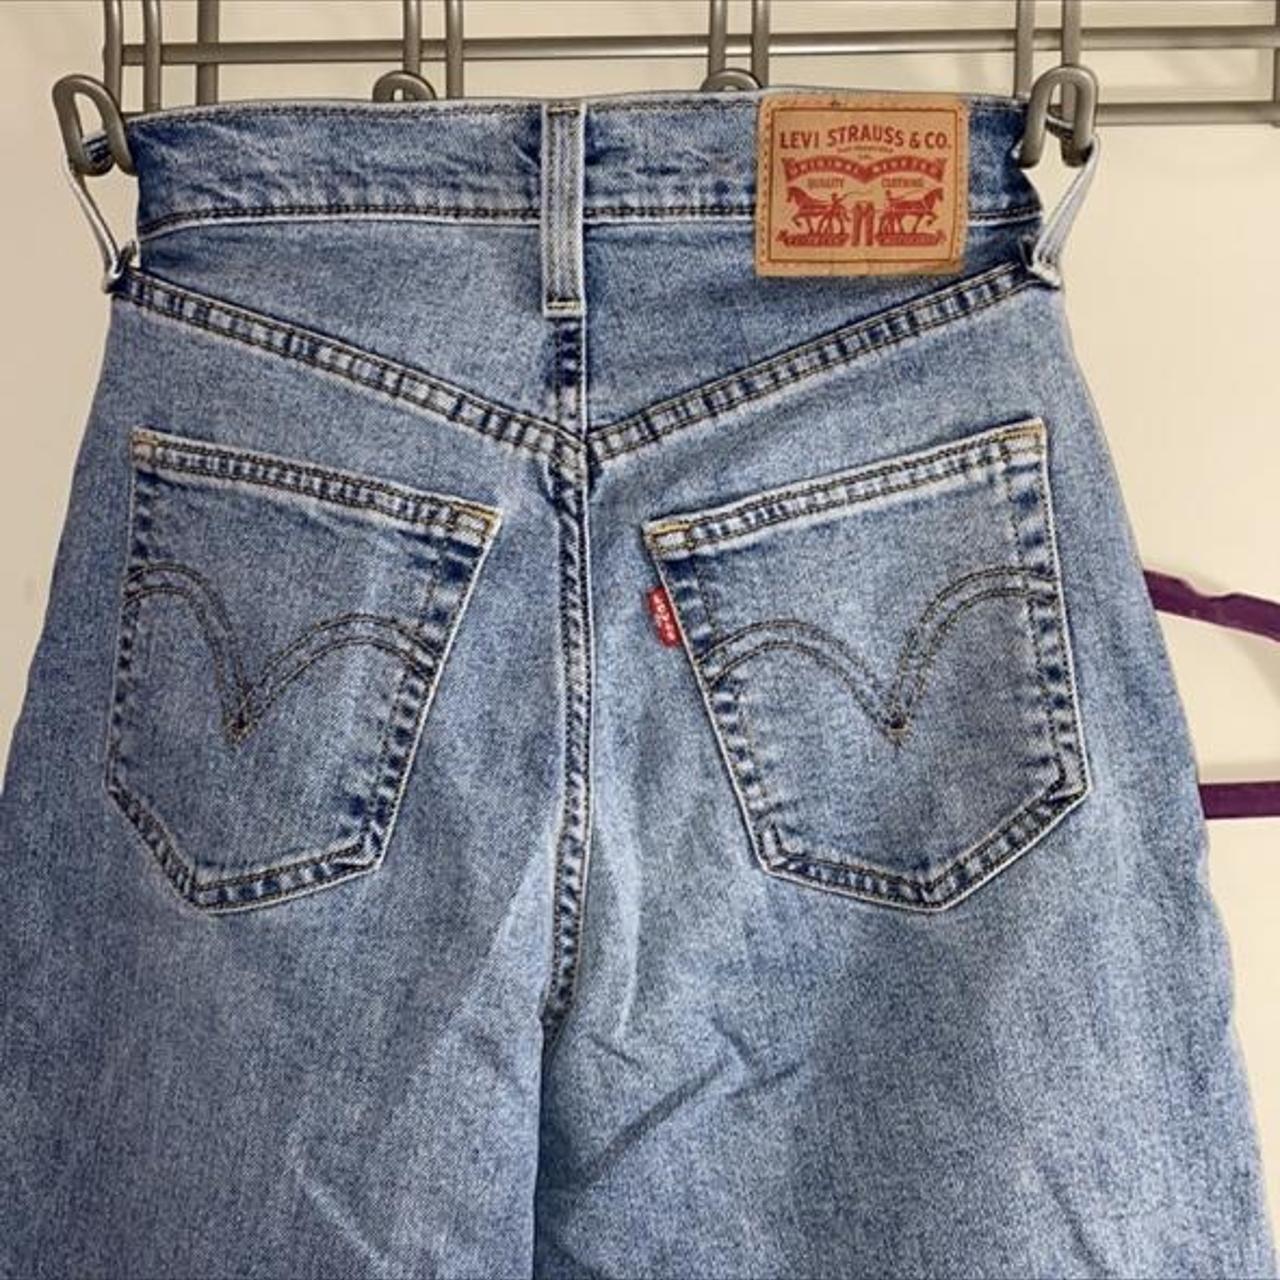 Levi’s rib cage straight ankle jeans -size 26, high... - Depop